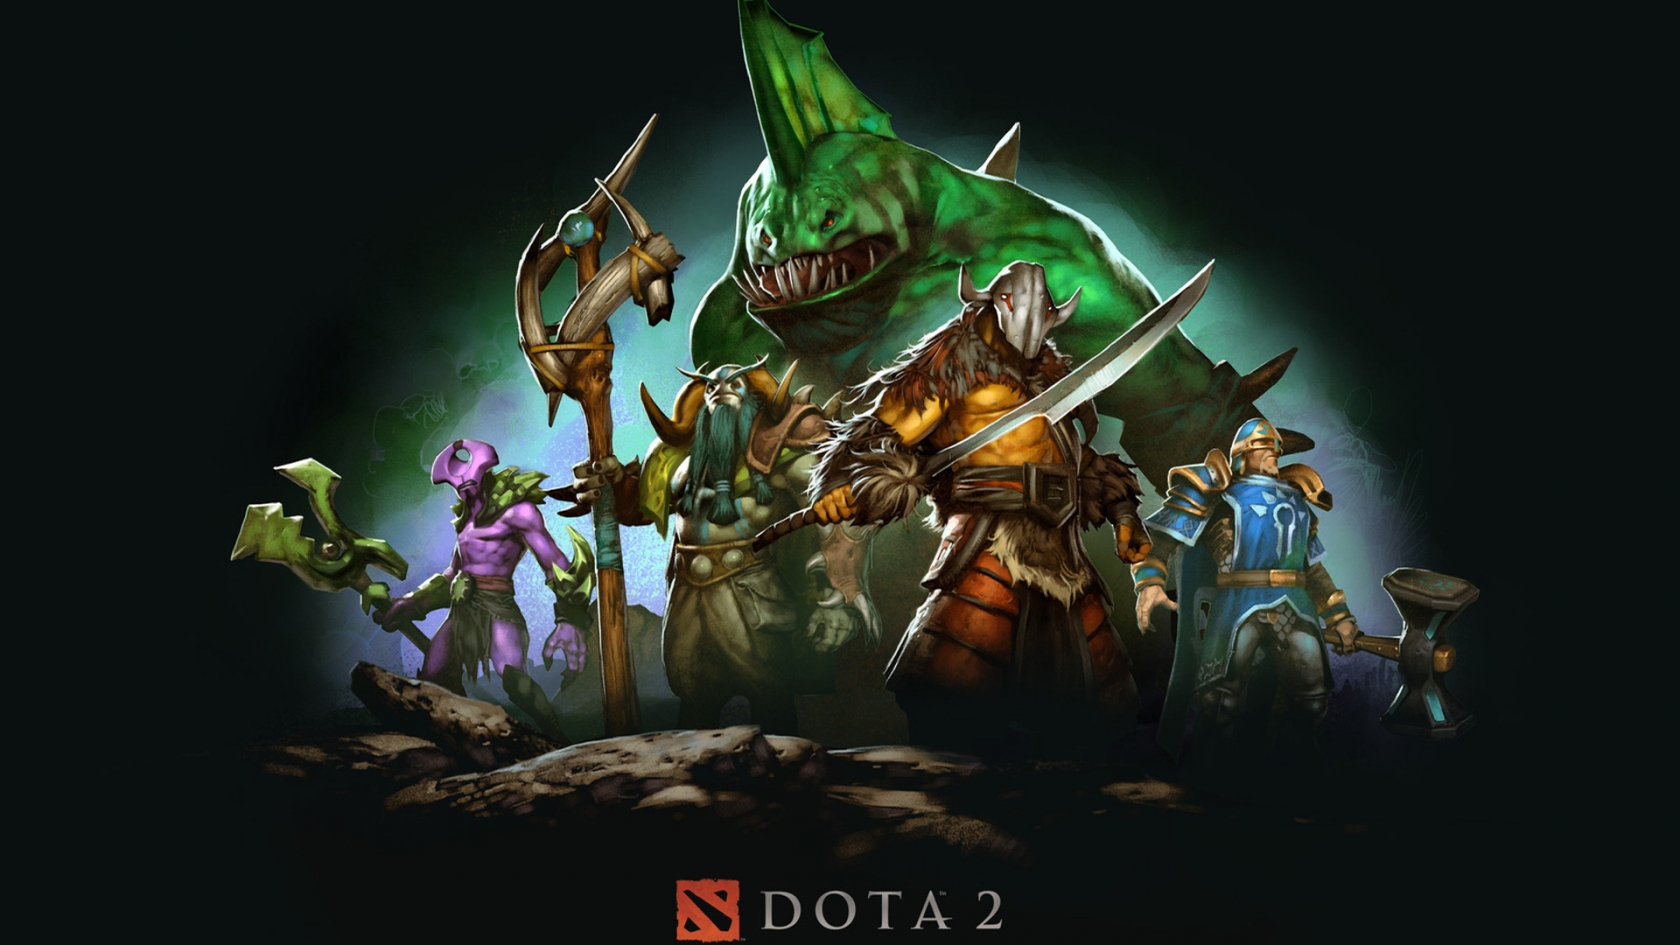 Dota 2 Characters for 1680 x 945 HDTV resolution